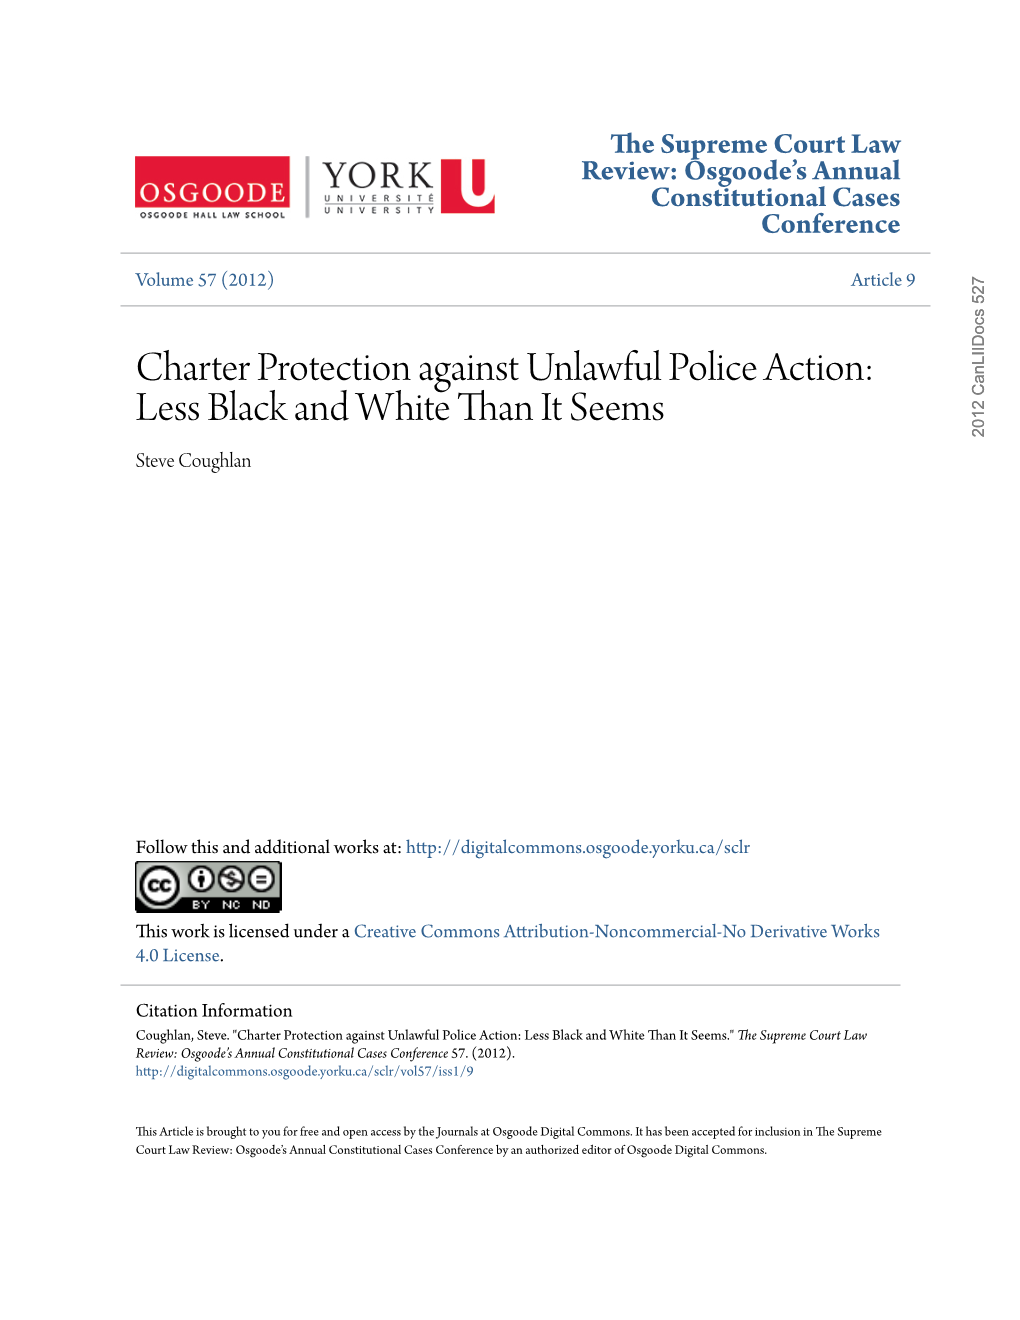 Charter Protection Against Unlawful Police Action: Less Black and White Than It Seems 2012 Canliidocs 527 Steve Coughlan